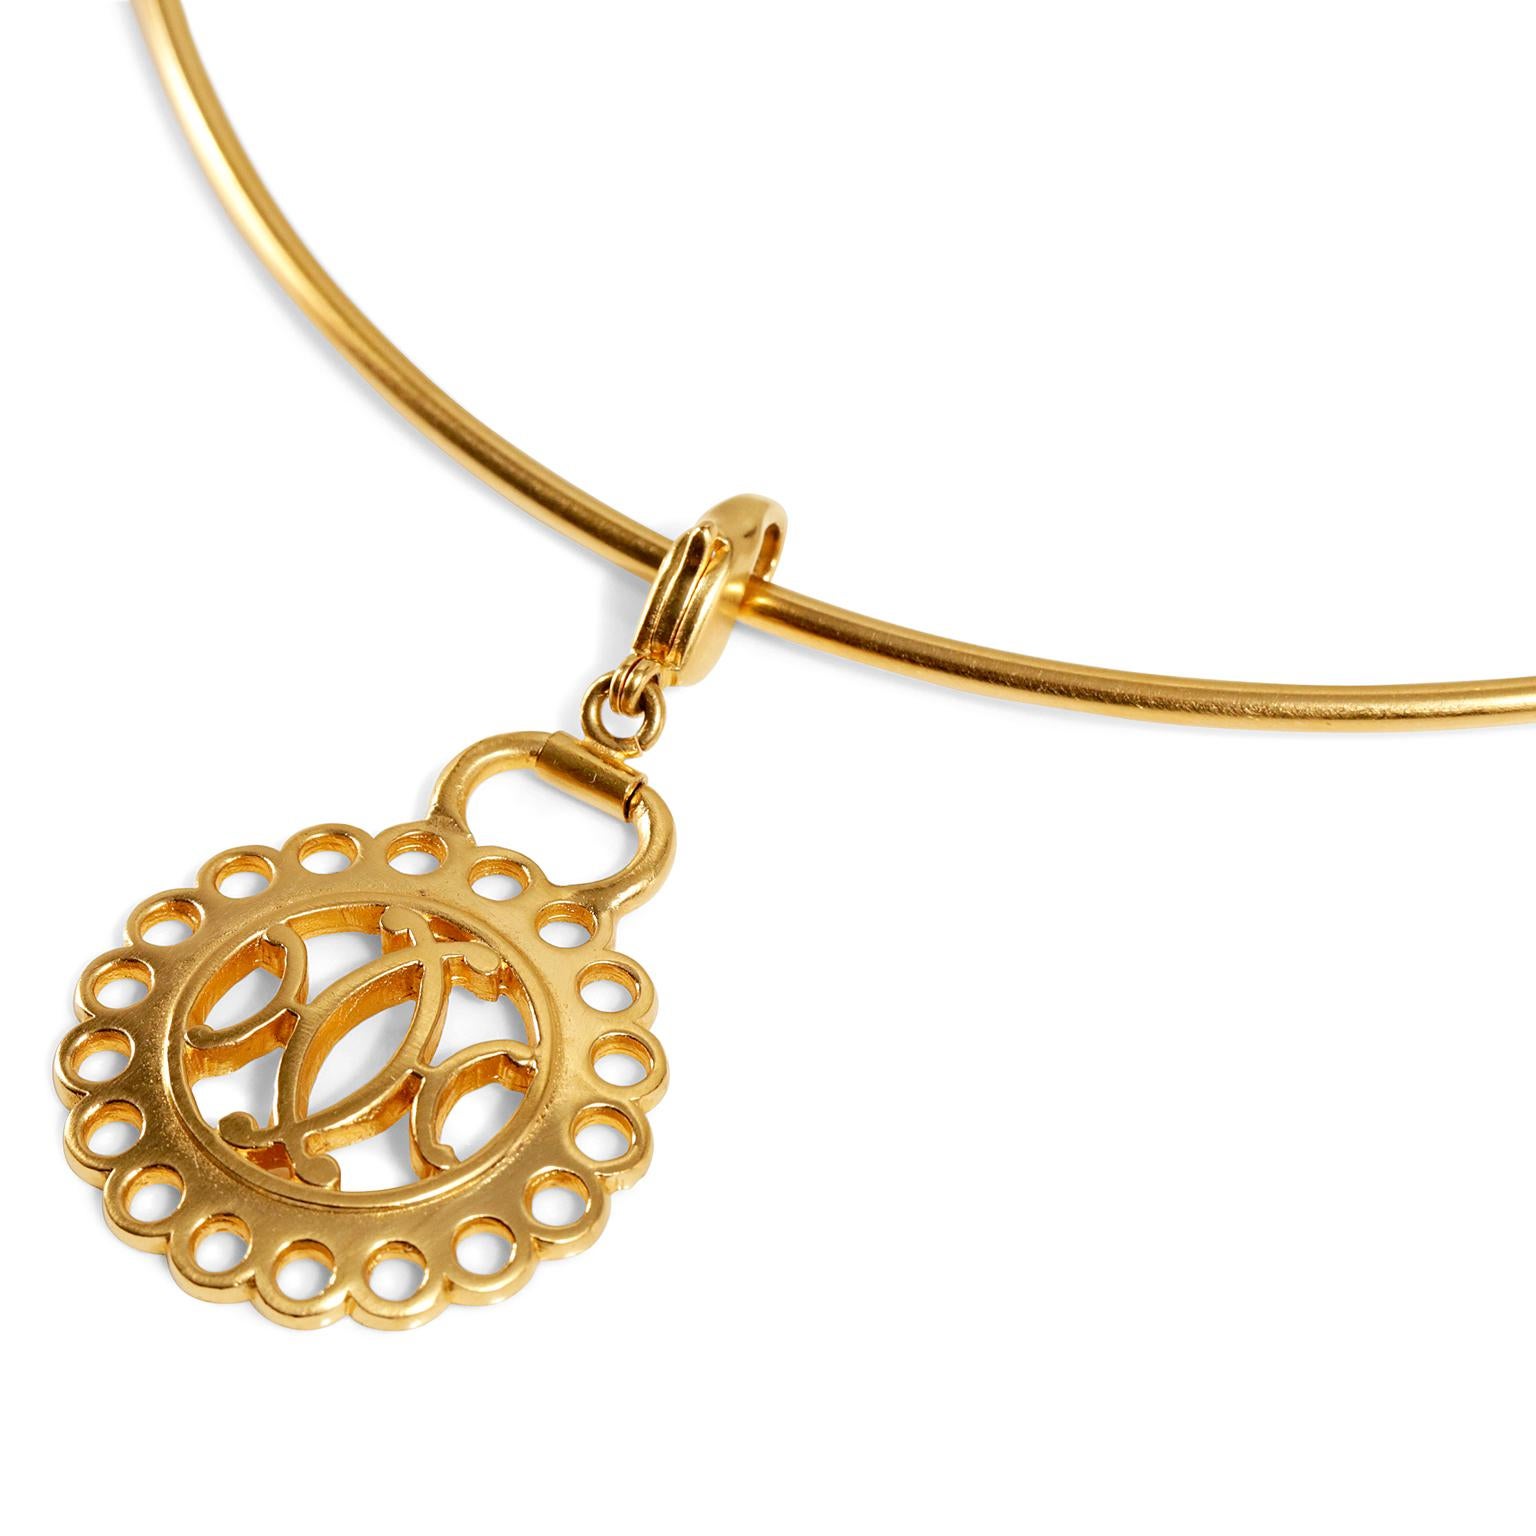  Hermès Gold Eclipse Cutout Disc Choker -  pristine condition
 A rare and unique find, this delicate piece is a brilliant addition to any collection.  
Gold eclipse disc charm dangles delicately from a gold rim choker.  6 inch diameter. 
